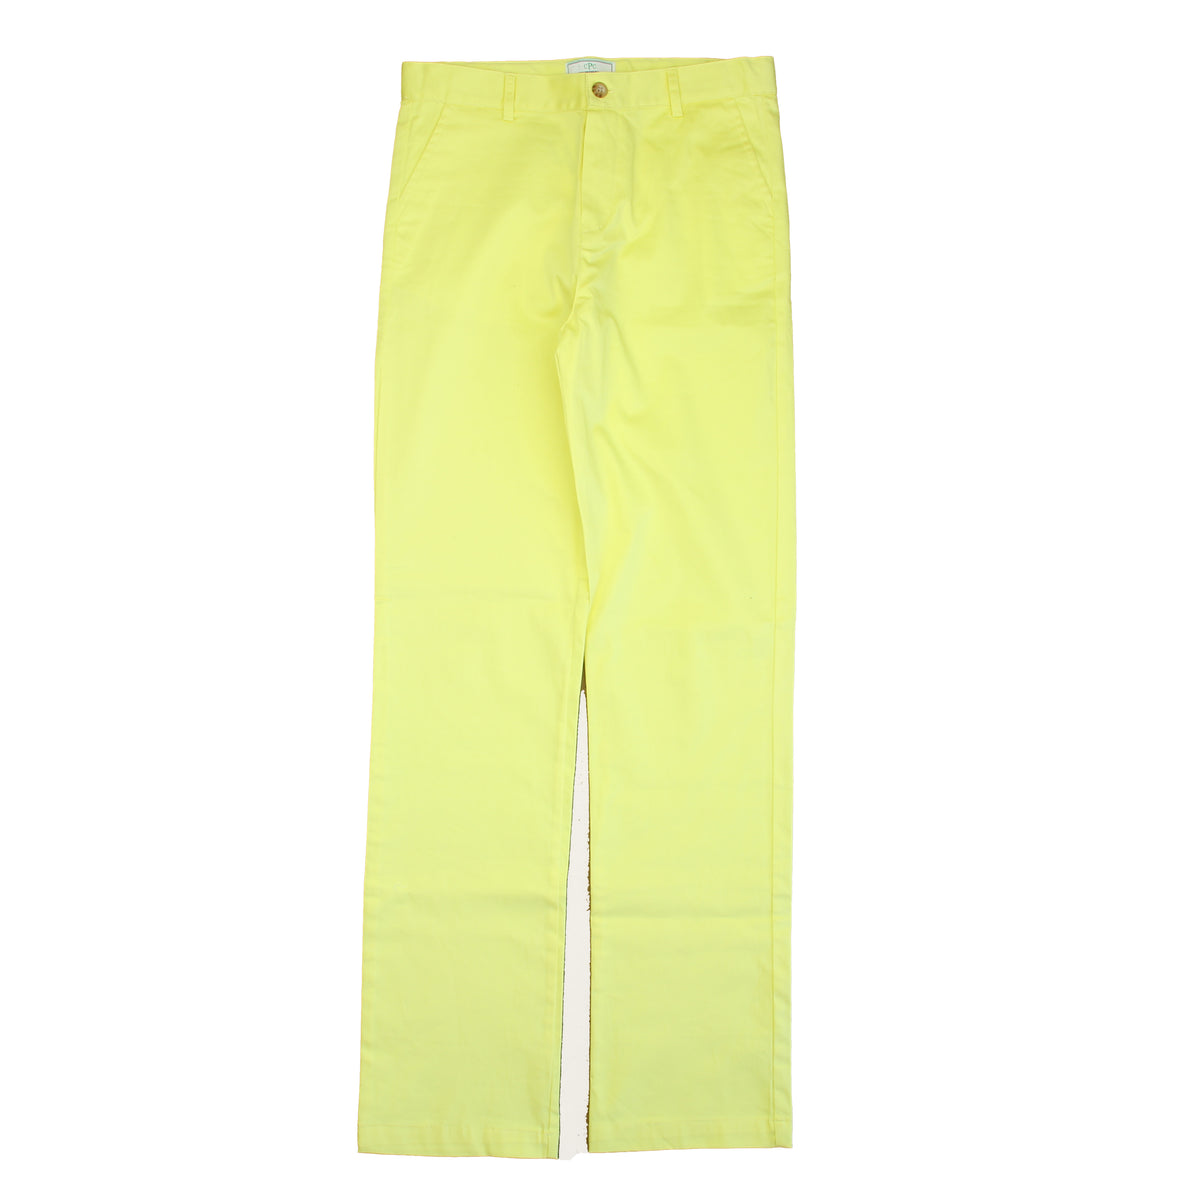 New with Tags: Yellow Pants size: 6-14 Years -- FINAL SALE